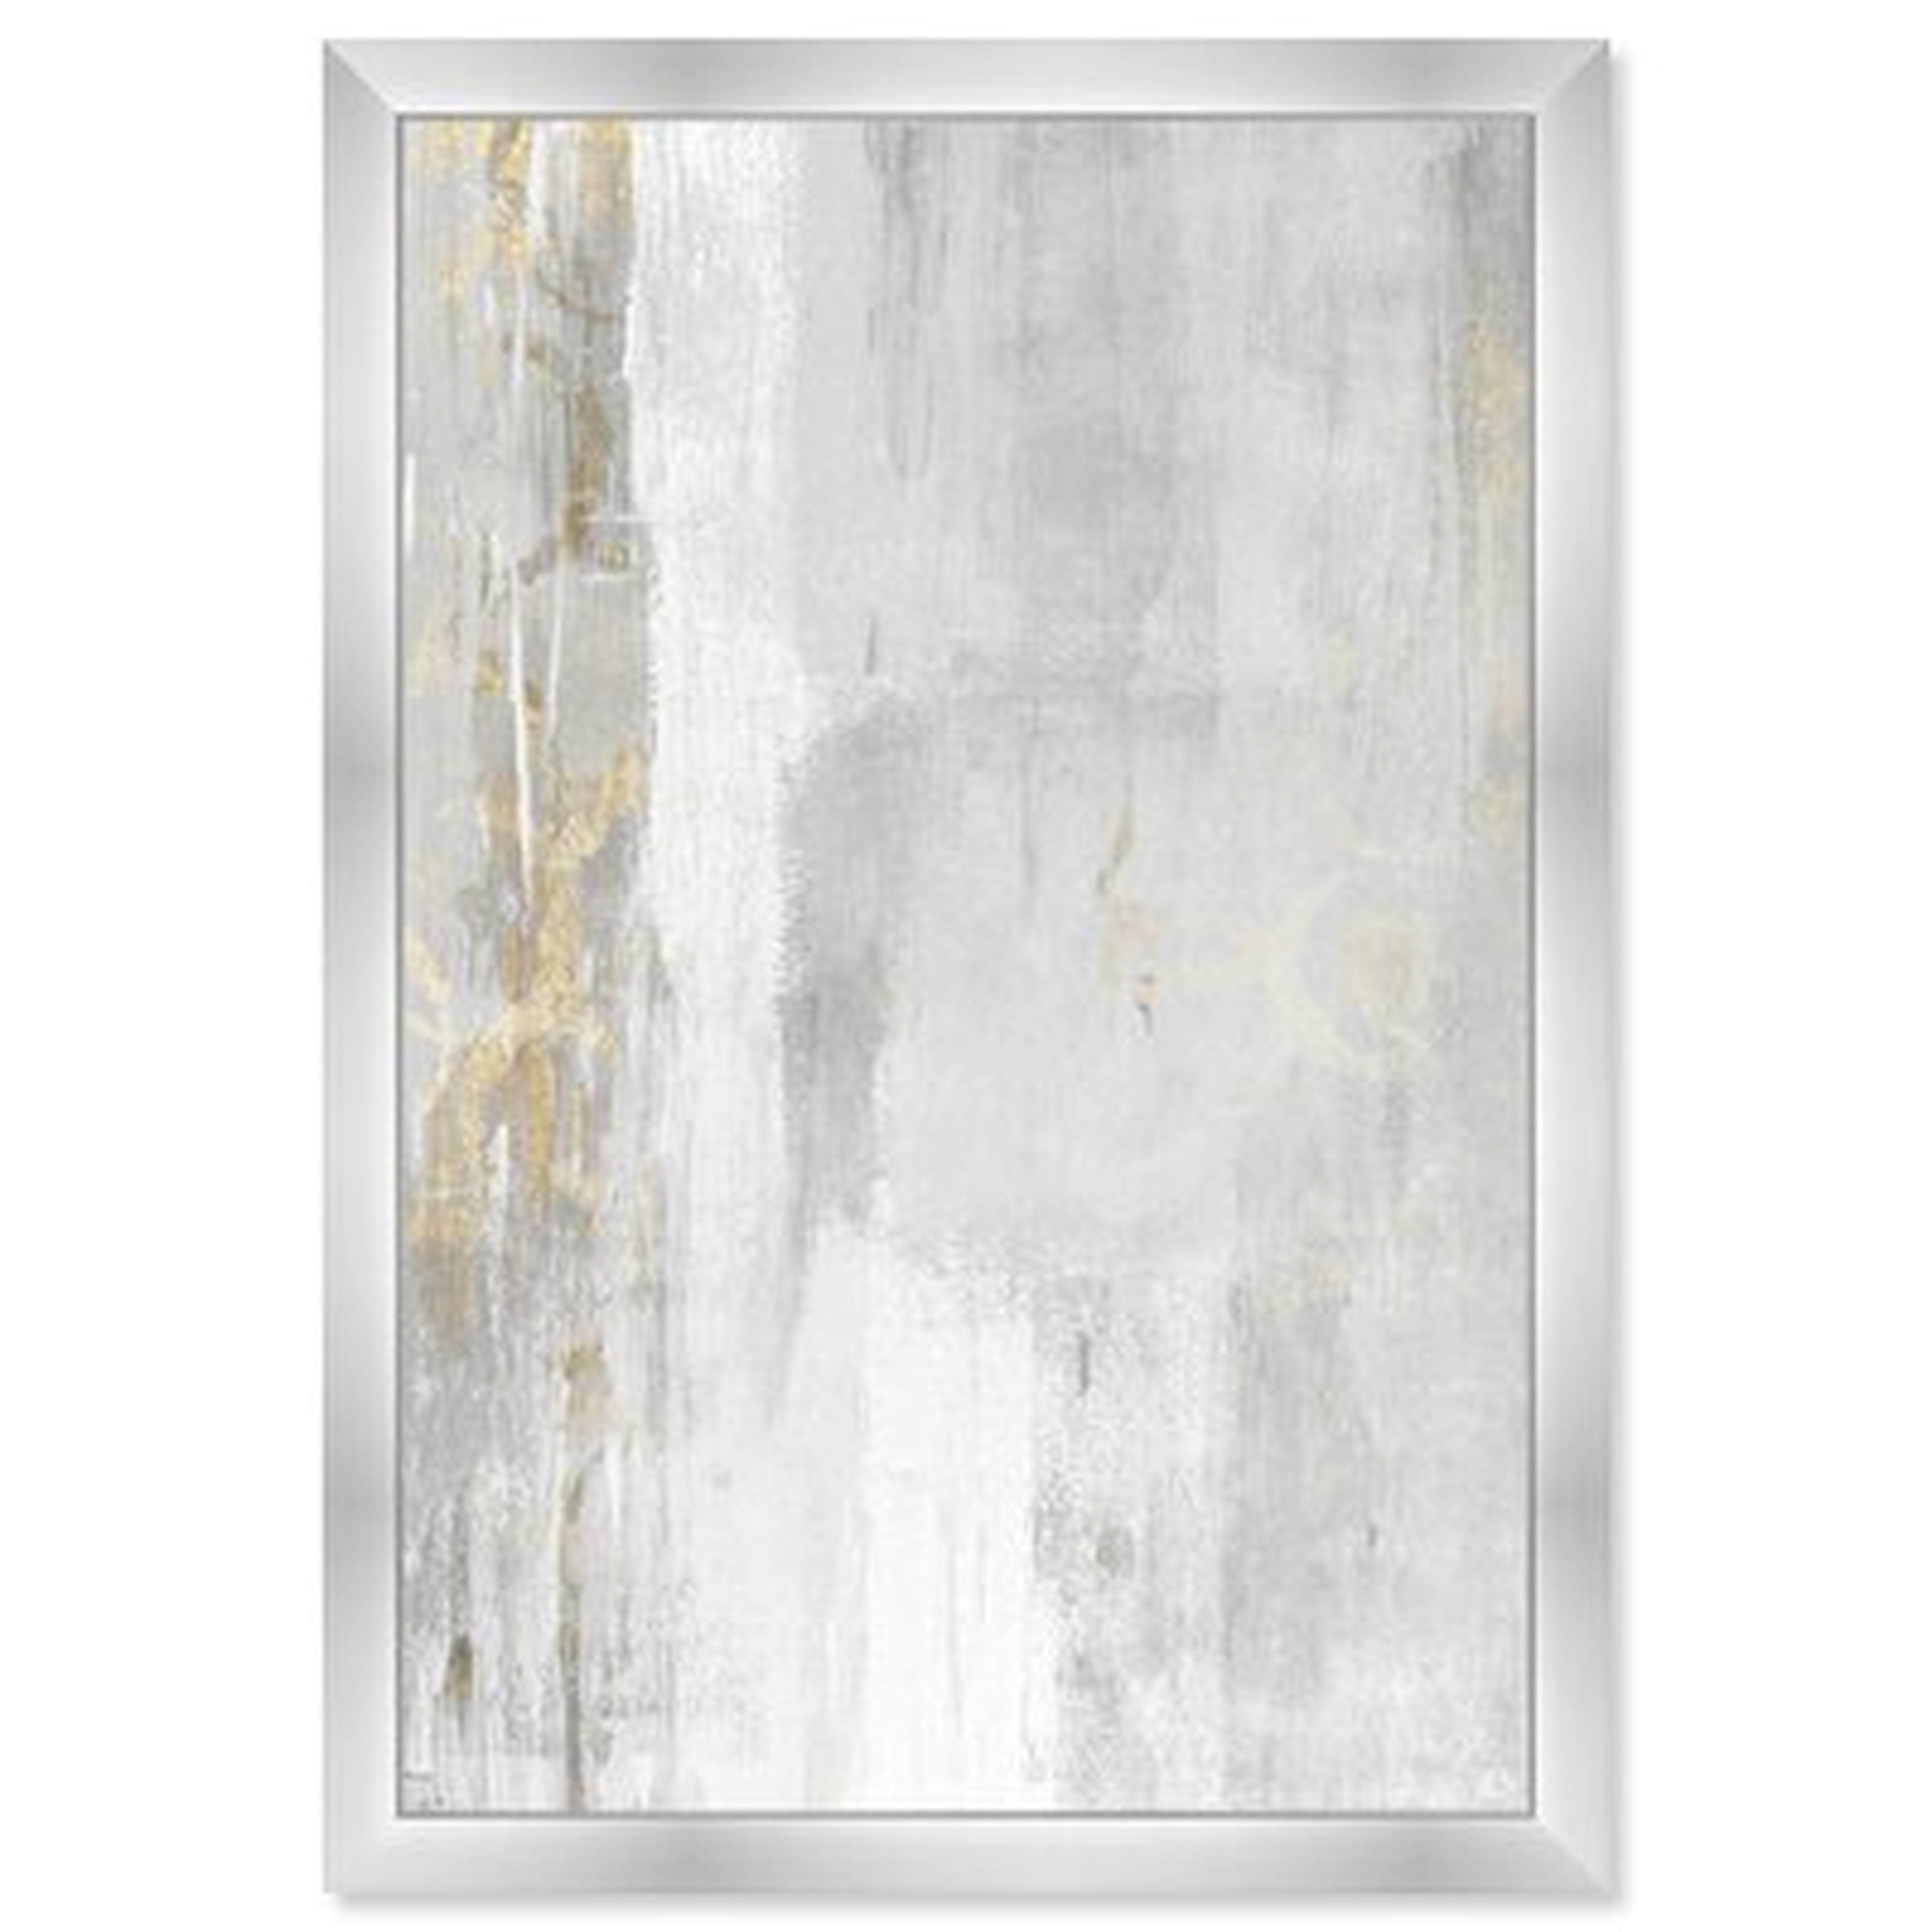 Abstract Elegance - Picture Frame Graphic Art Print on Canvas - Wayfair